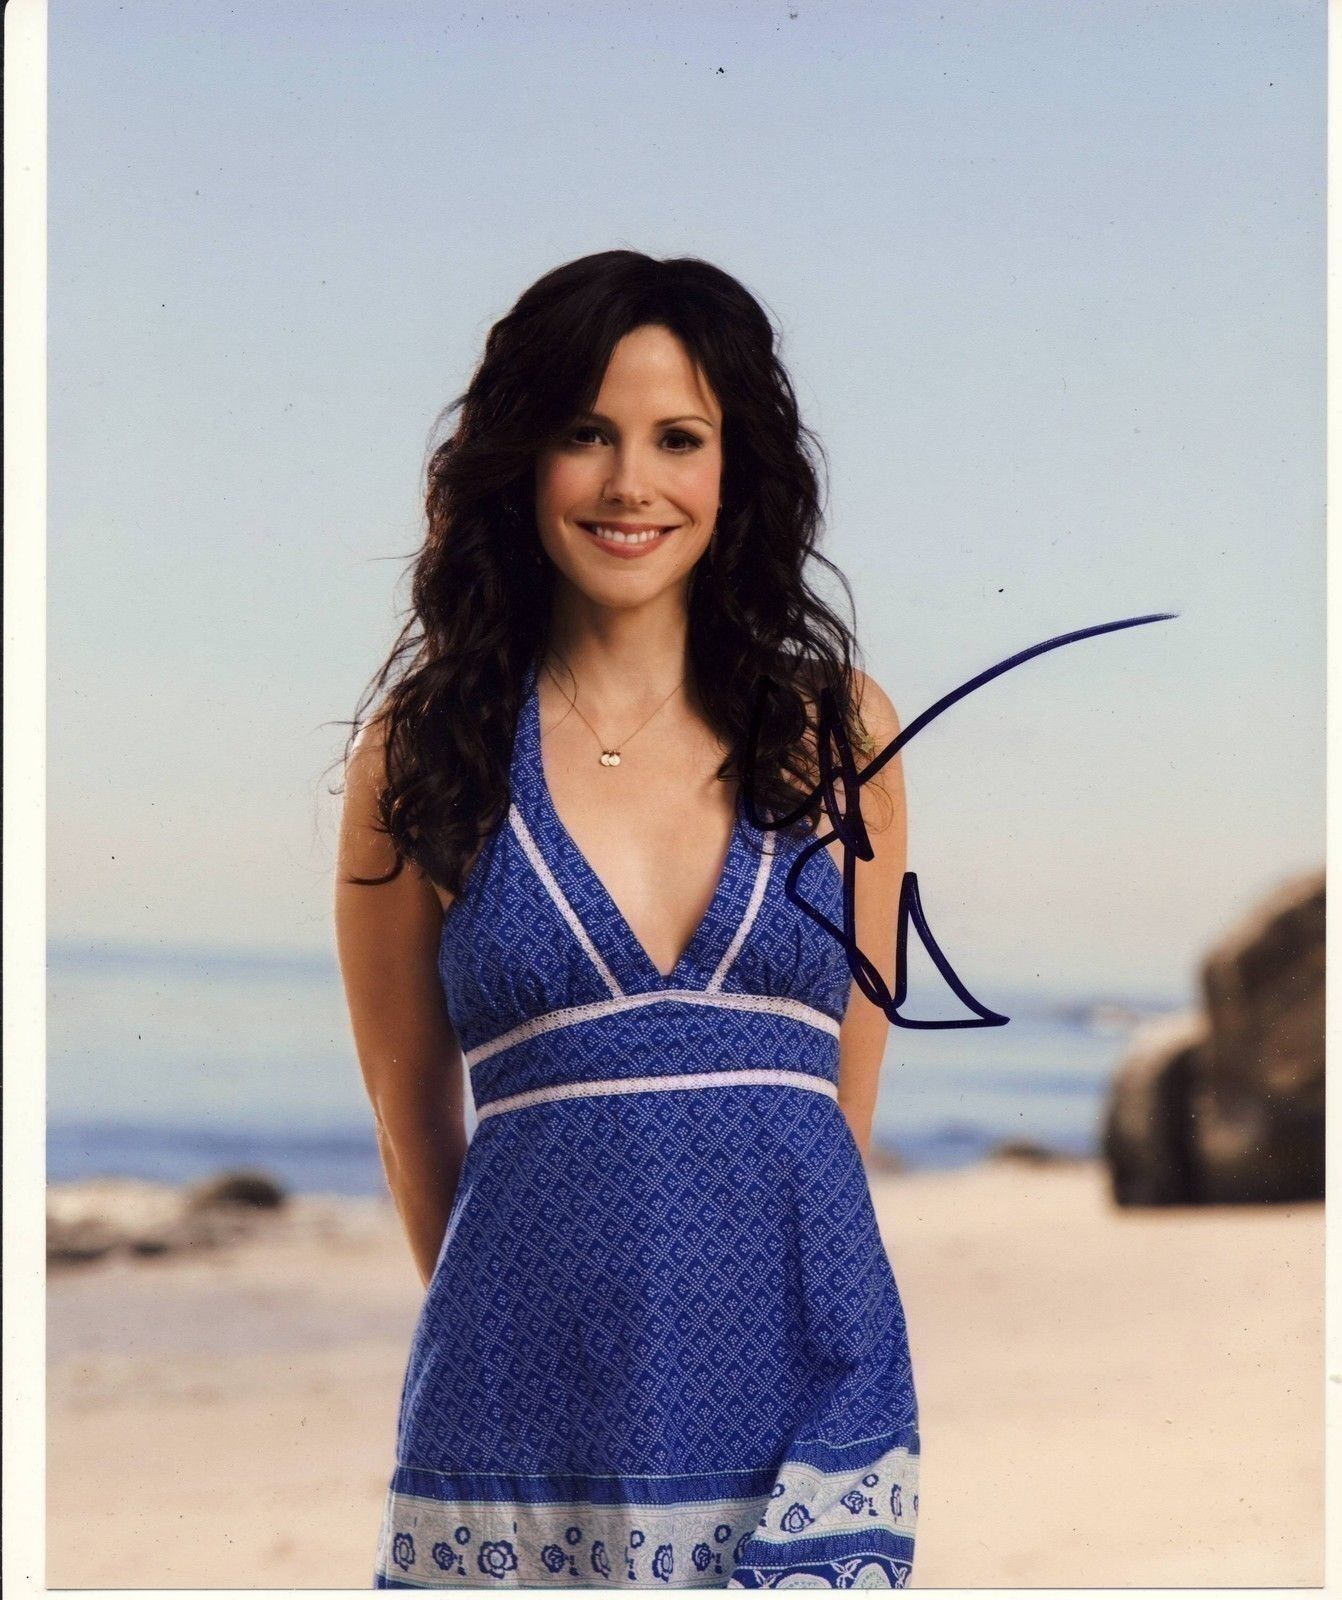 Mary-Louise Parker Autograph WEEDS Signed 10x8 Photo Poster painting AFTAL [1951]